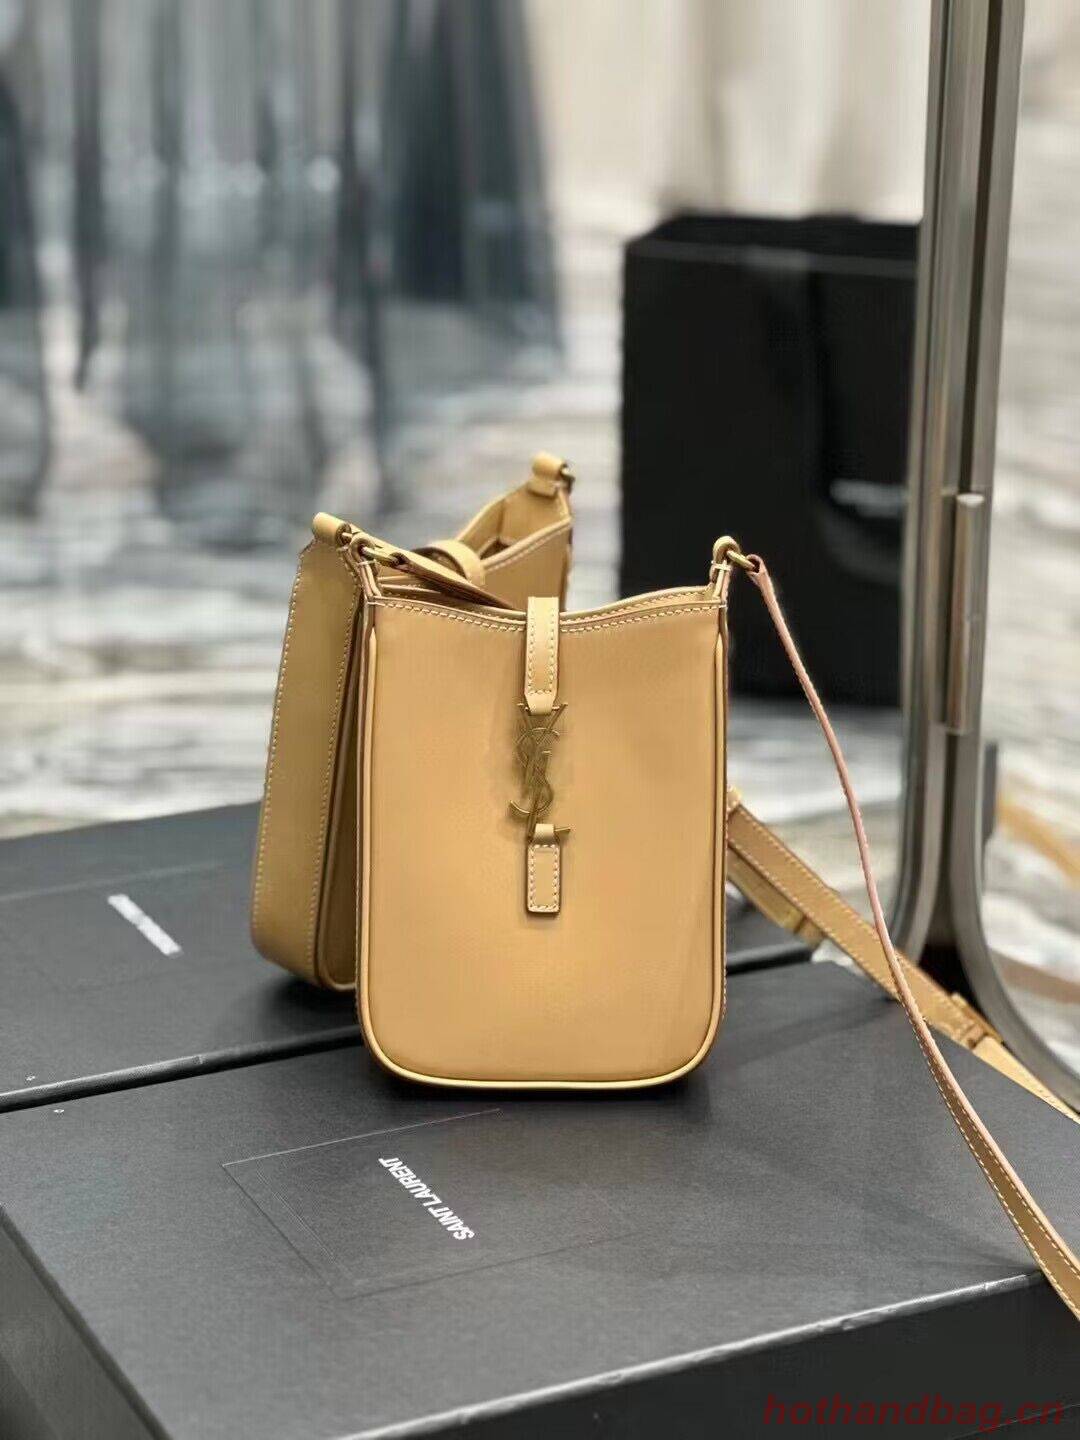 SAINT LAURENT LE 5 A 7 MINI VERTICAL IN SHINY LEATHER 7352142 BROWN GOLD